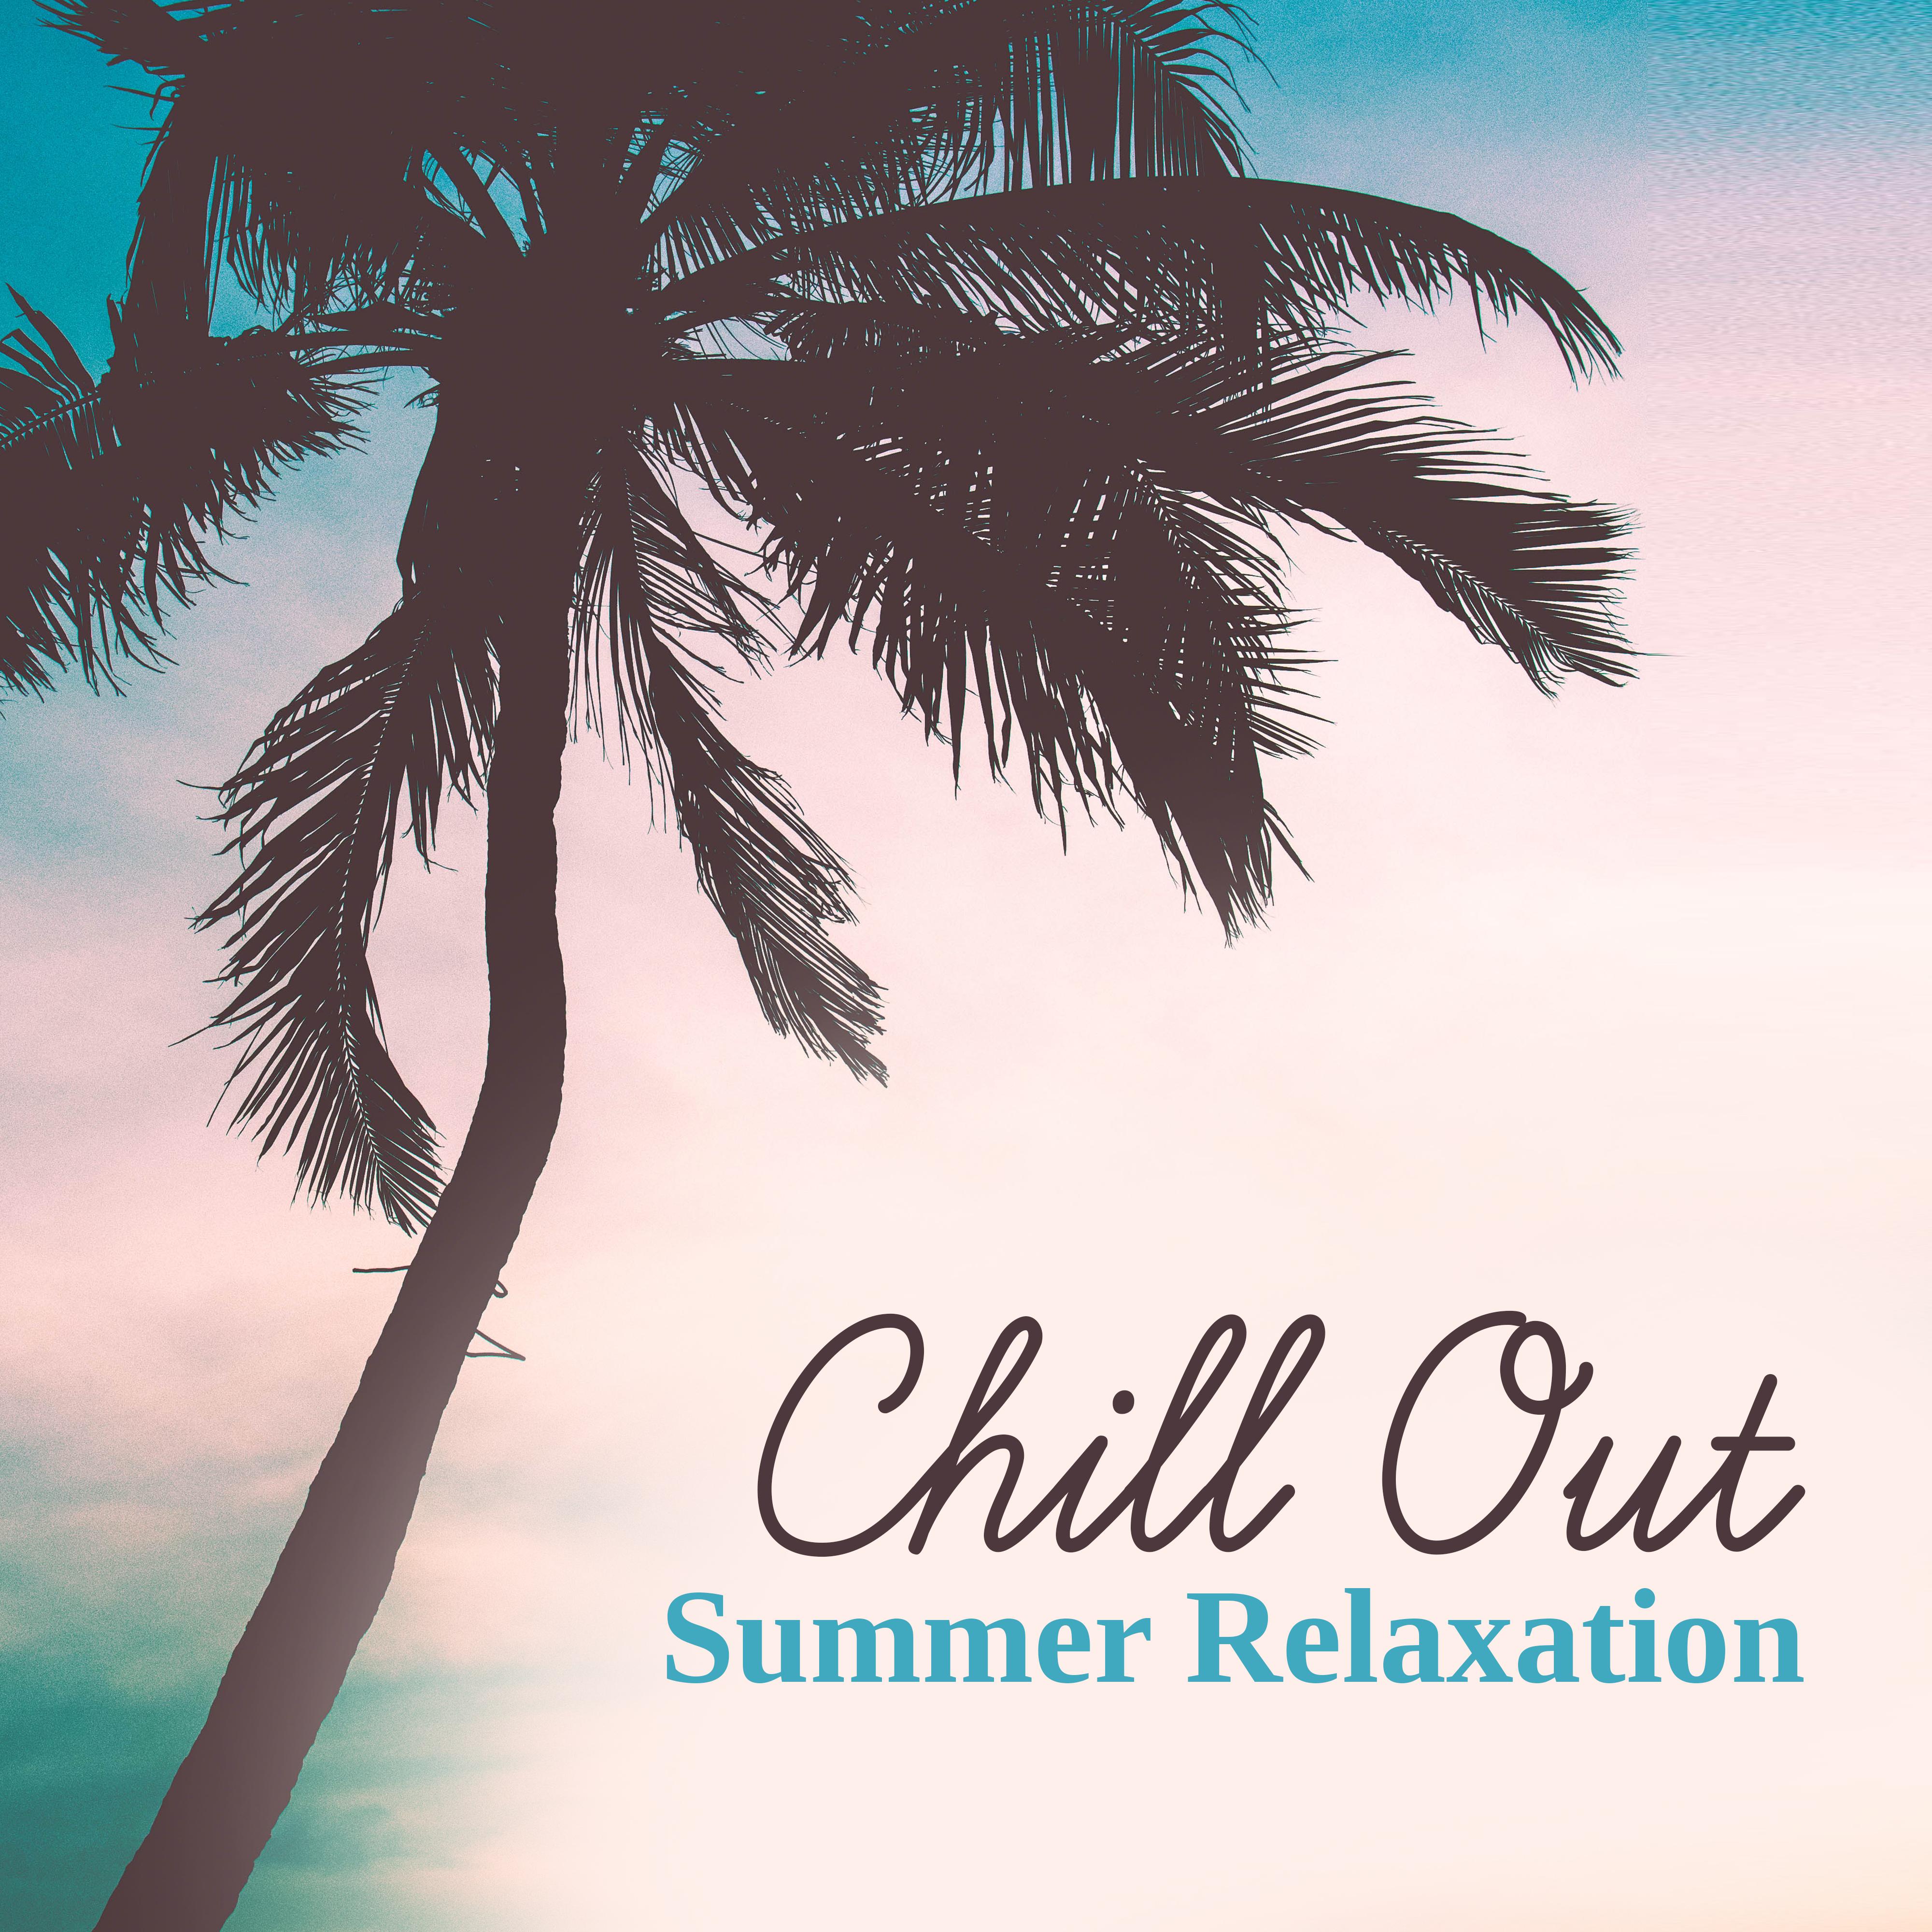 Chill Out Summer Relaxation